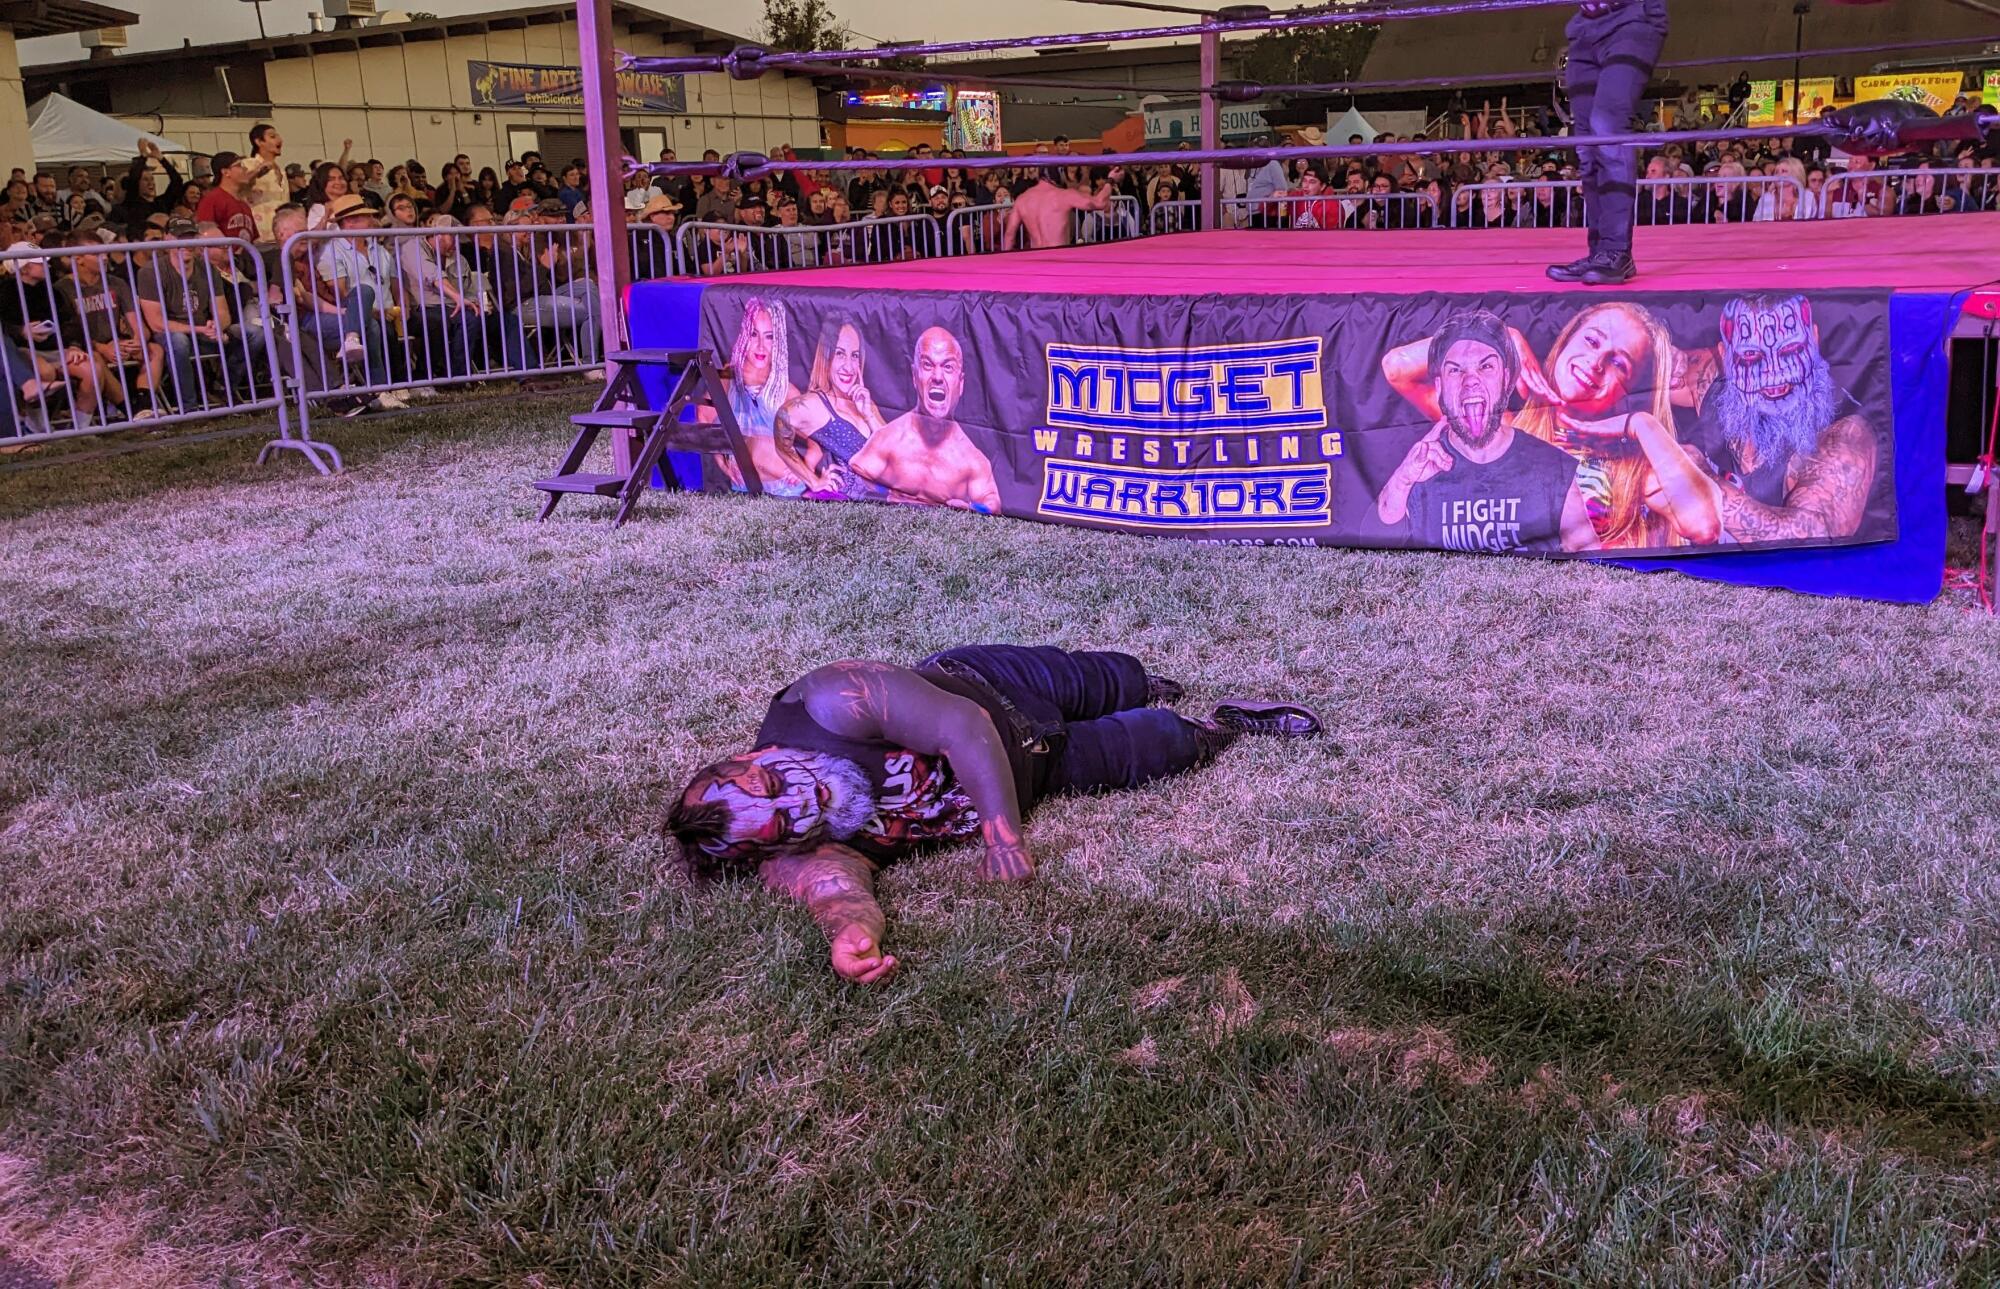 A person lies on the ground next to a wrestling ring.